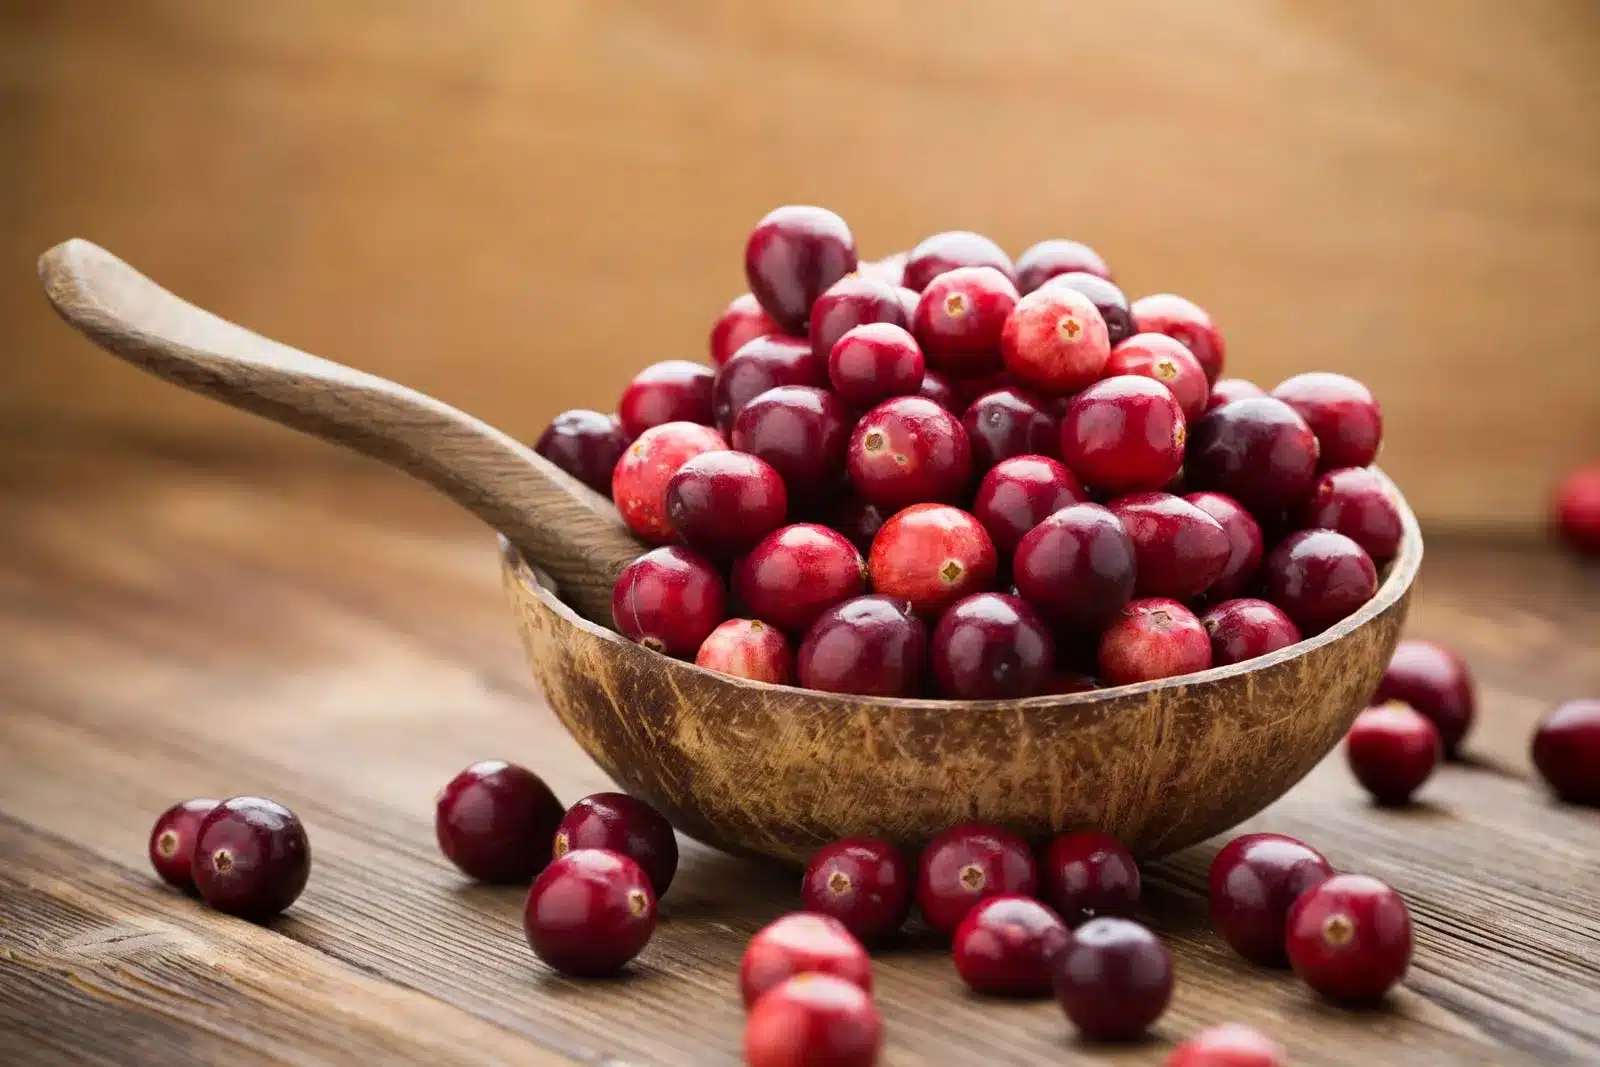 Cranberries in a Bowl